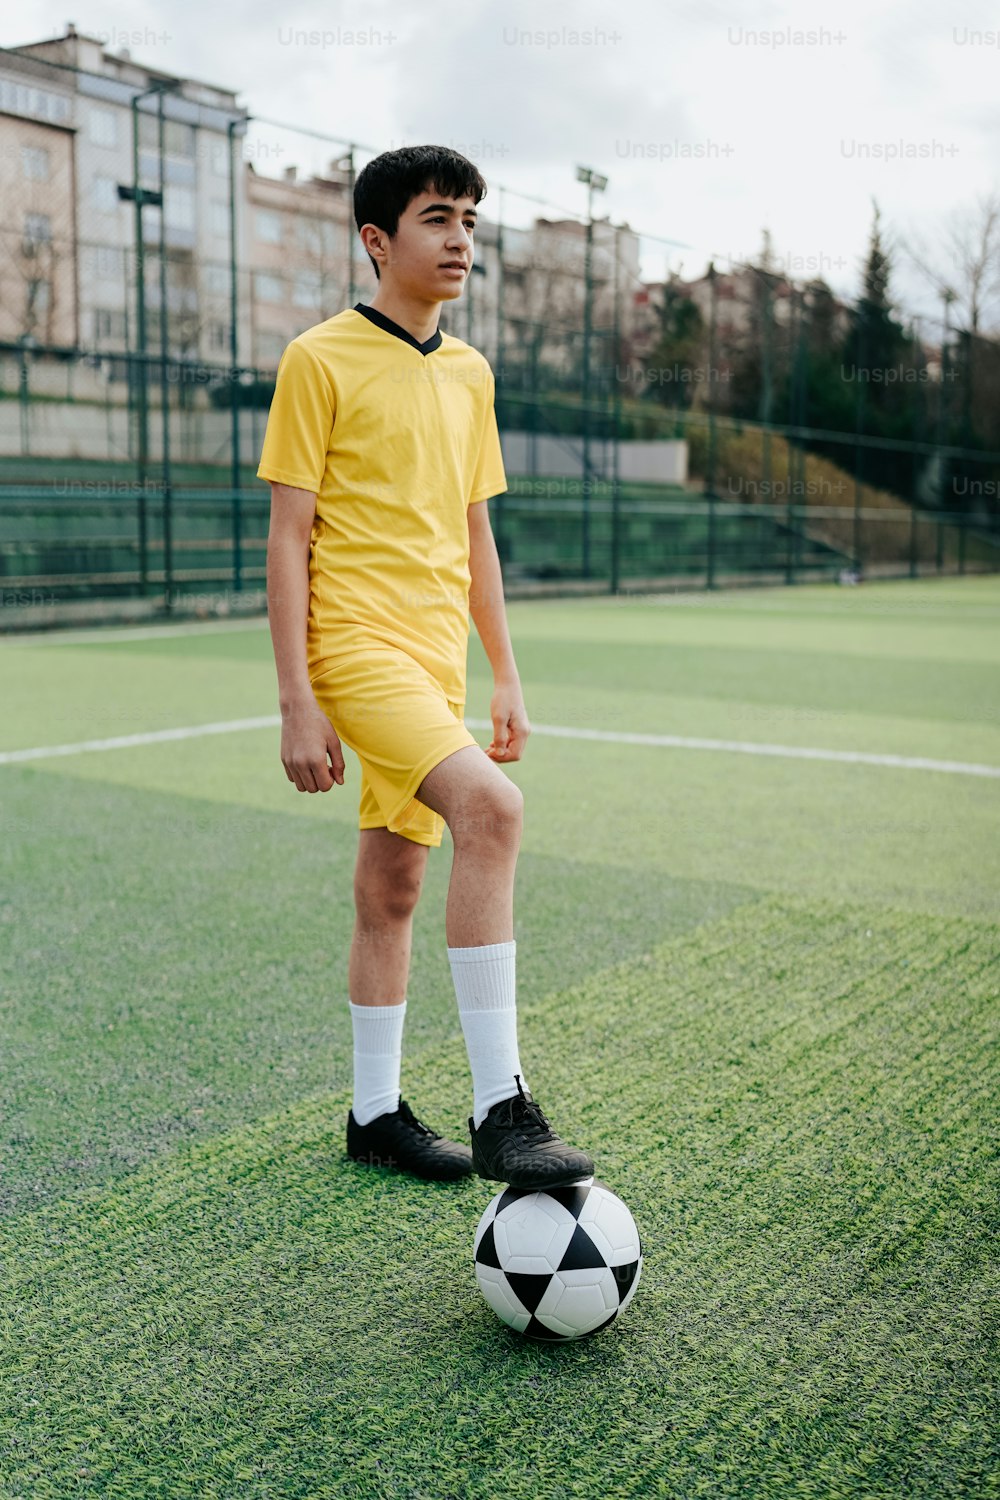 a young boy in a yellow uniform standing on a soccer ball